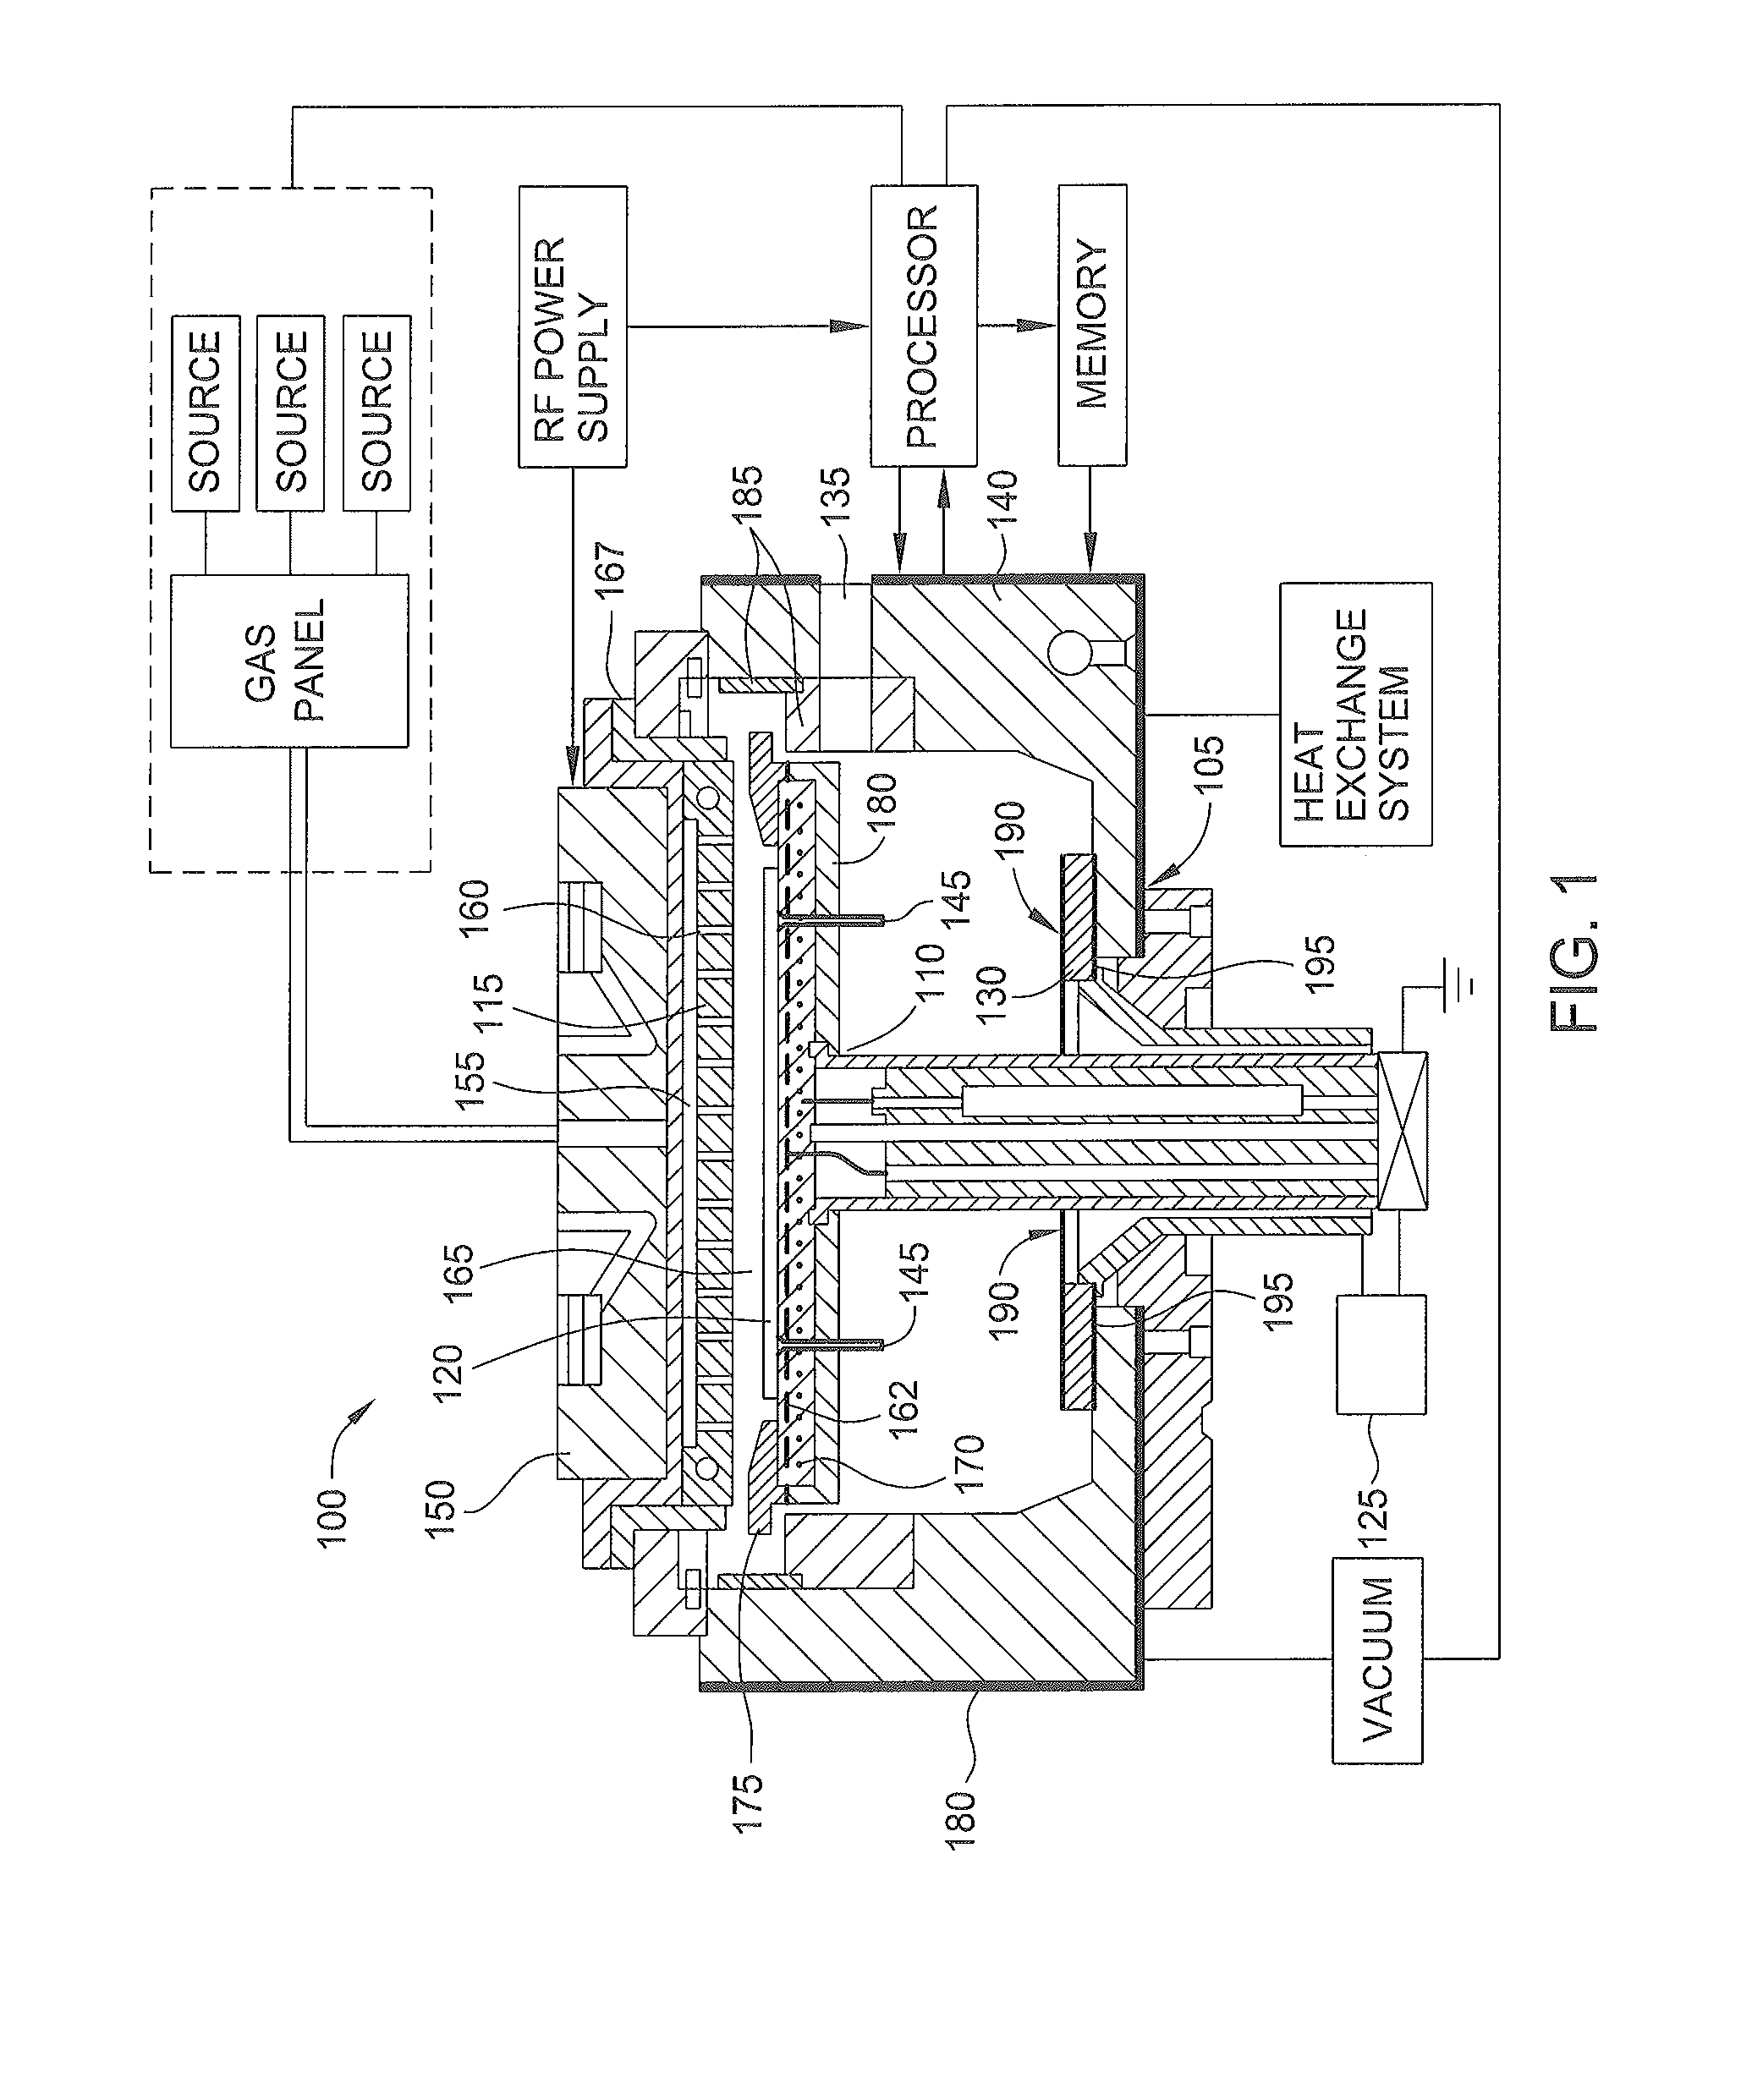 Thermal radiation barrier for substrate processing chamber components